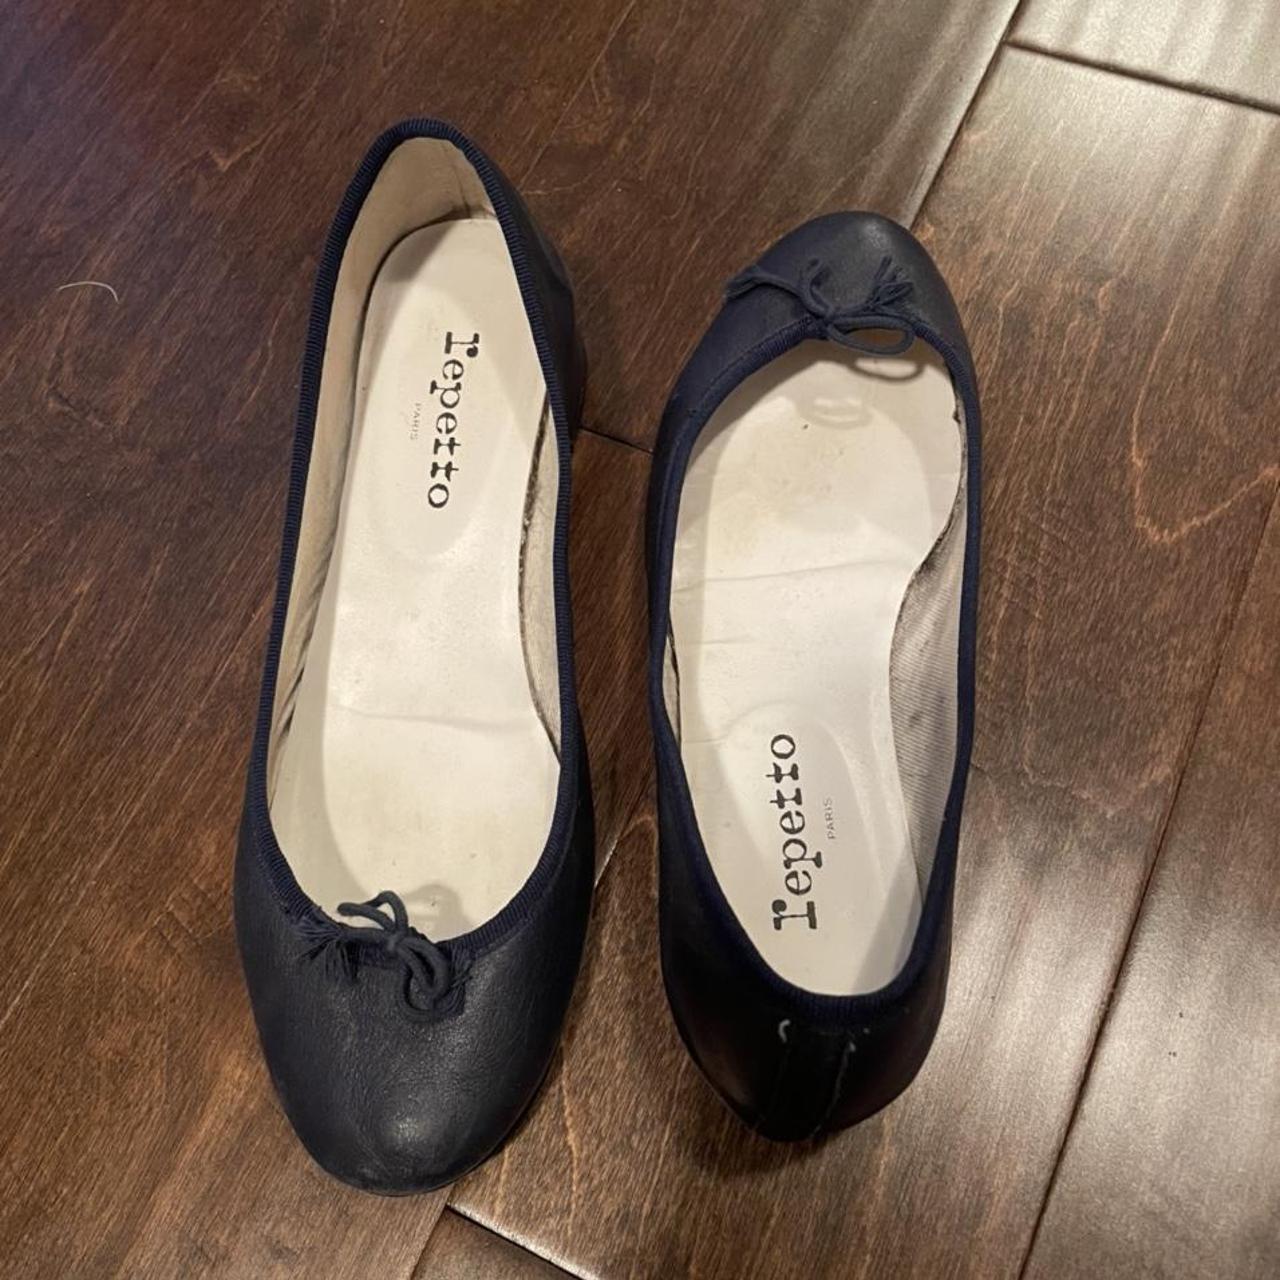 Product Image 1 - these repetto beauties are hard